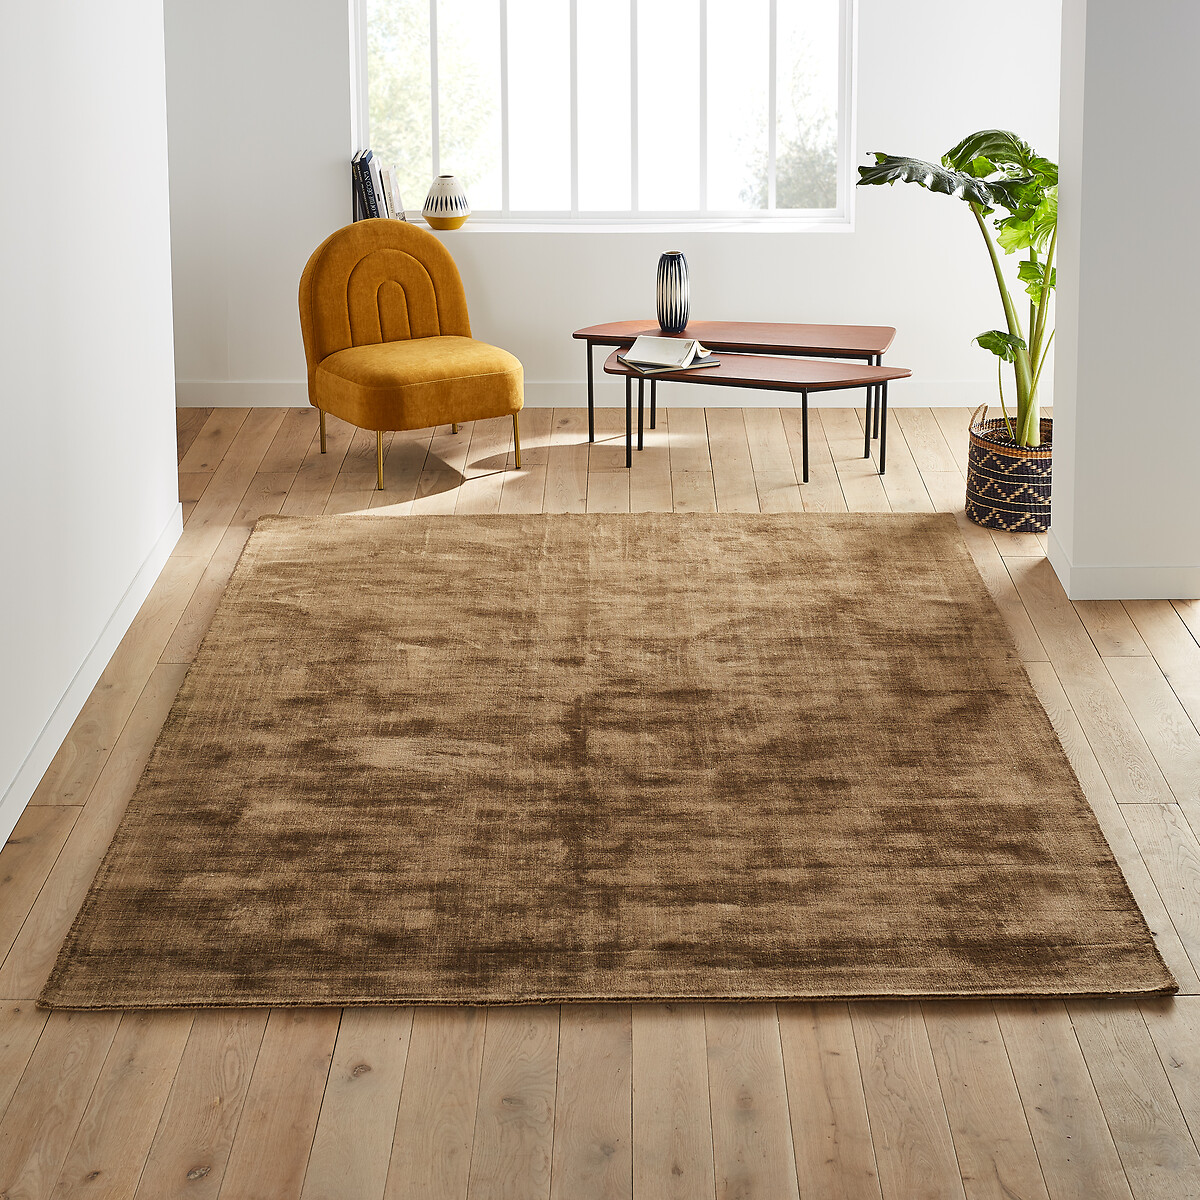 La Redoute Rio Grey Aged Ombre Effect Rug Large 150x230cm RRP £125 